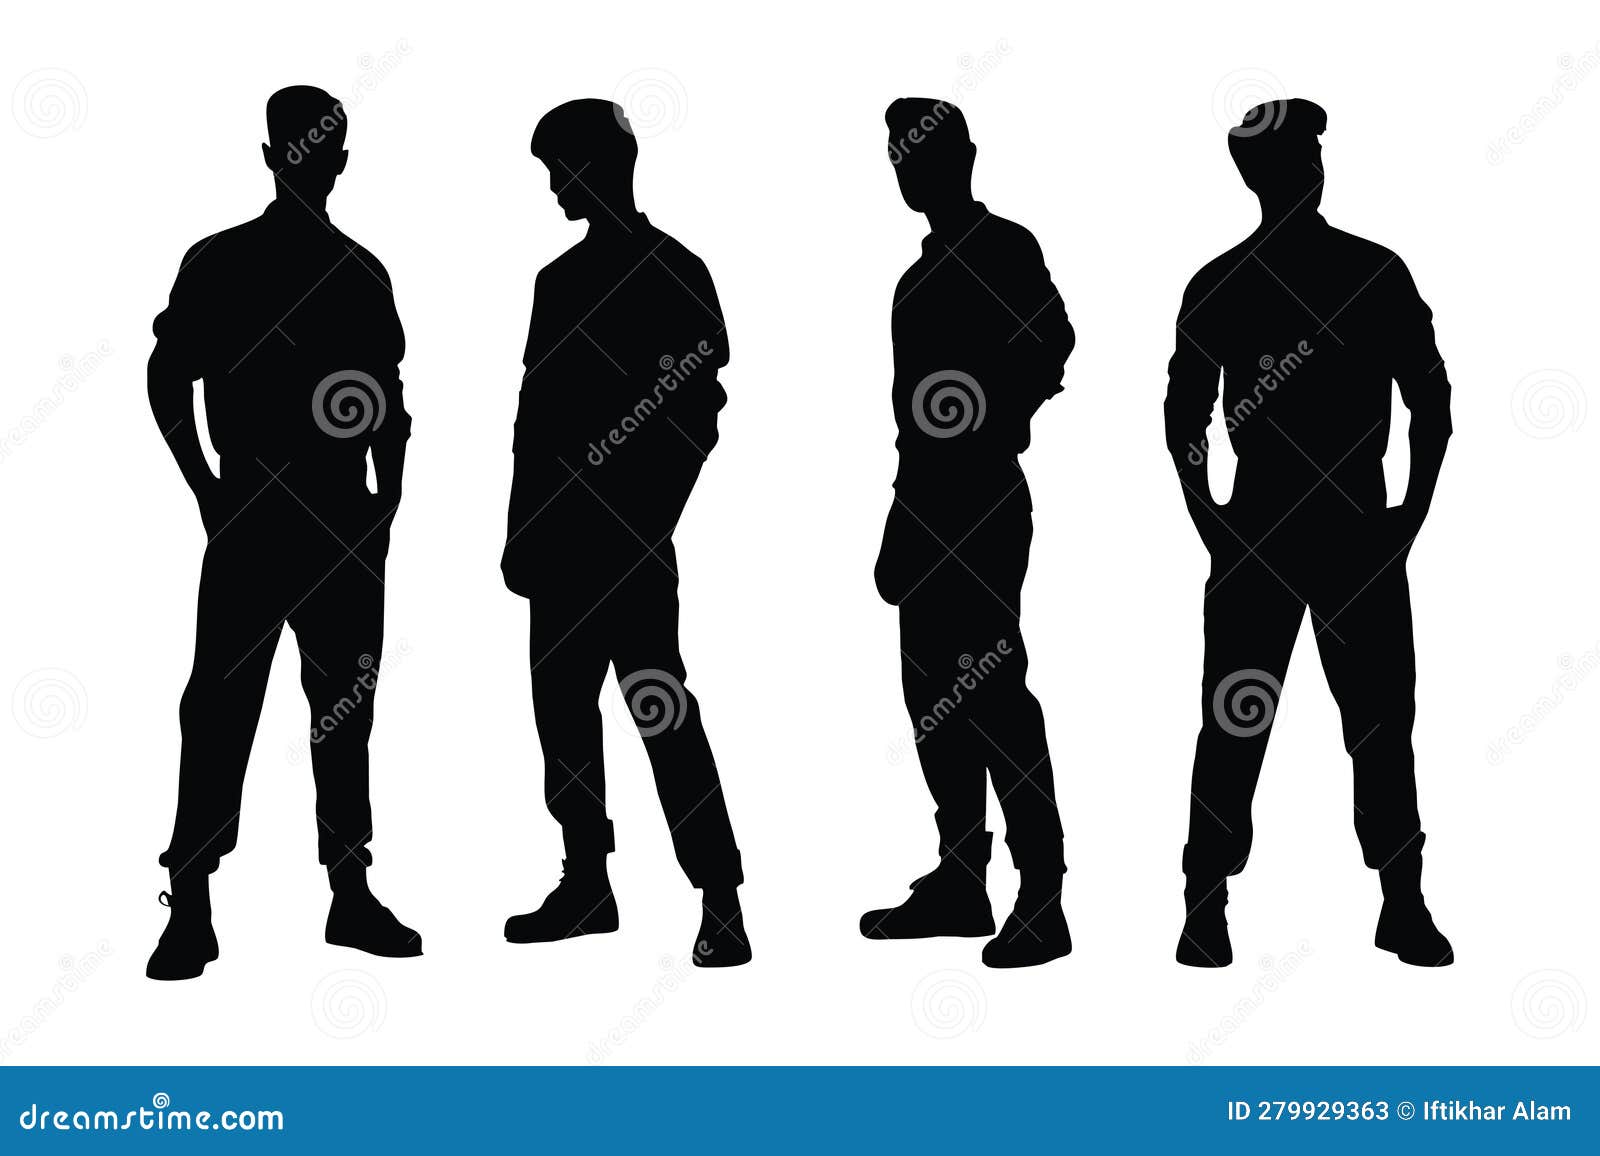 Male Model Silhouette on a White Background. Fashion Models Wearing ...